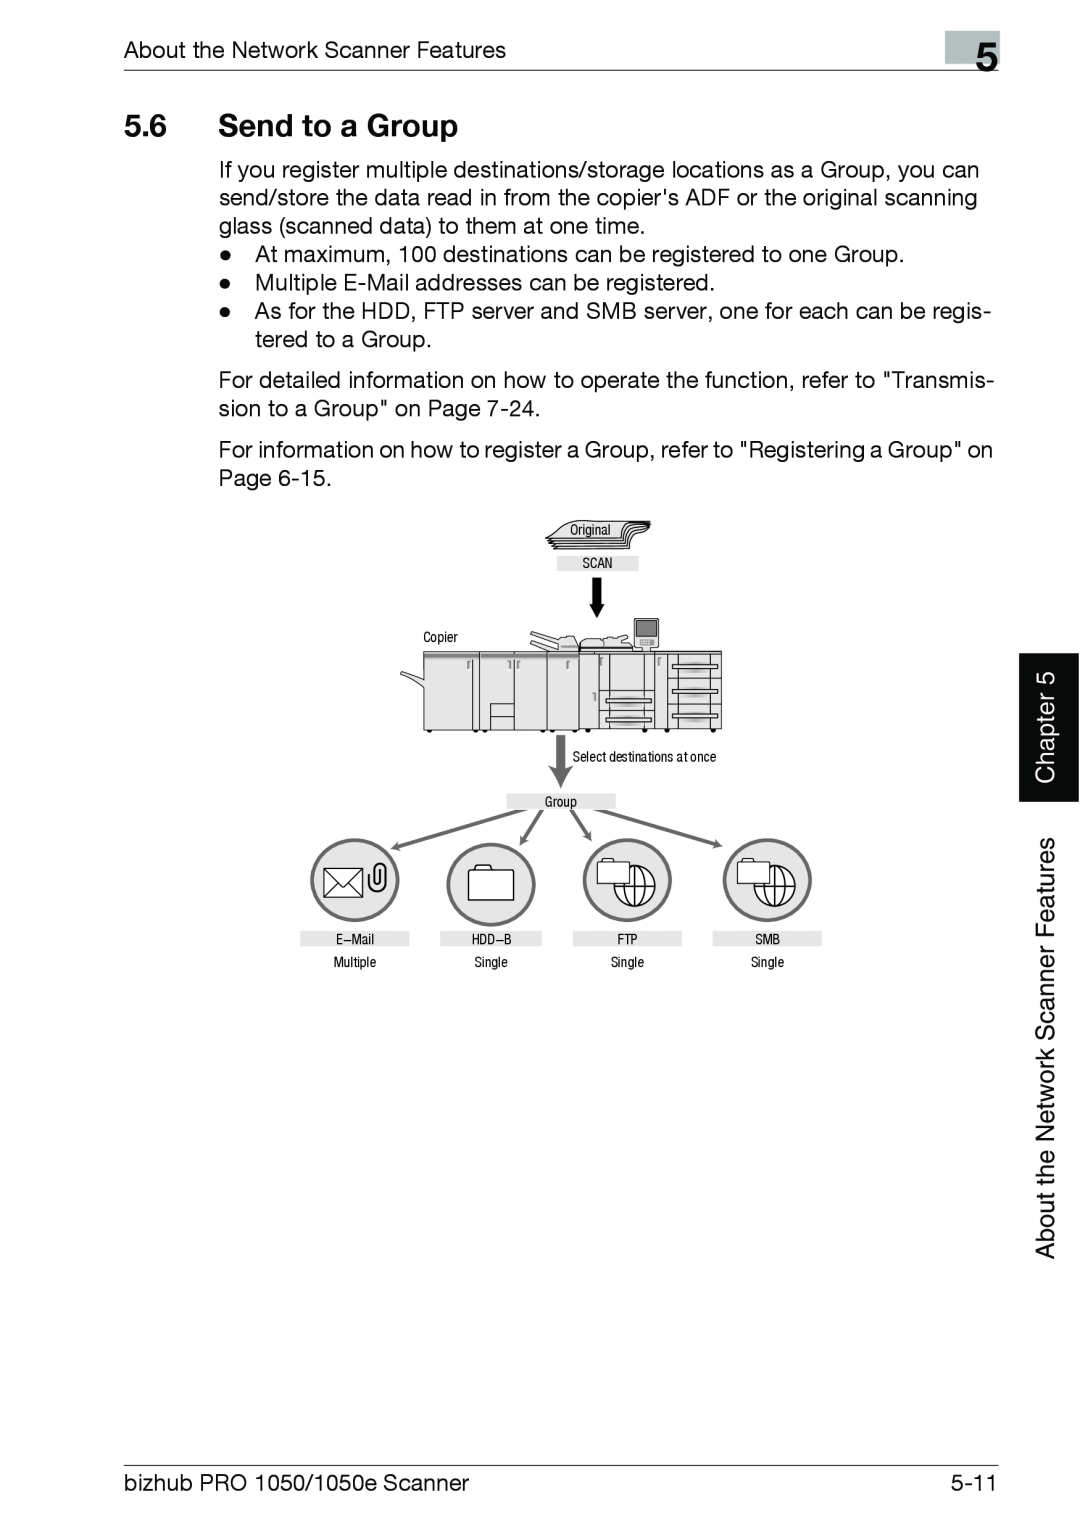 Konica Minolta 1050E appendix 5.6Send to a Group, Chapter, About the Network Scanner Features 